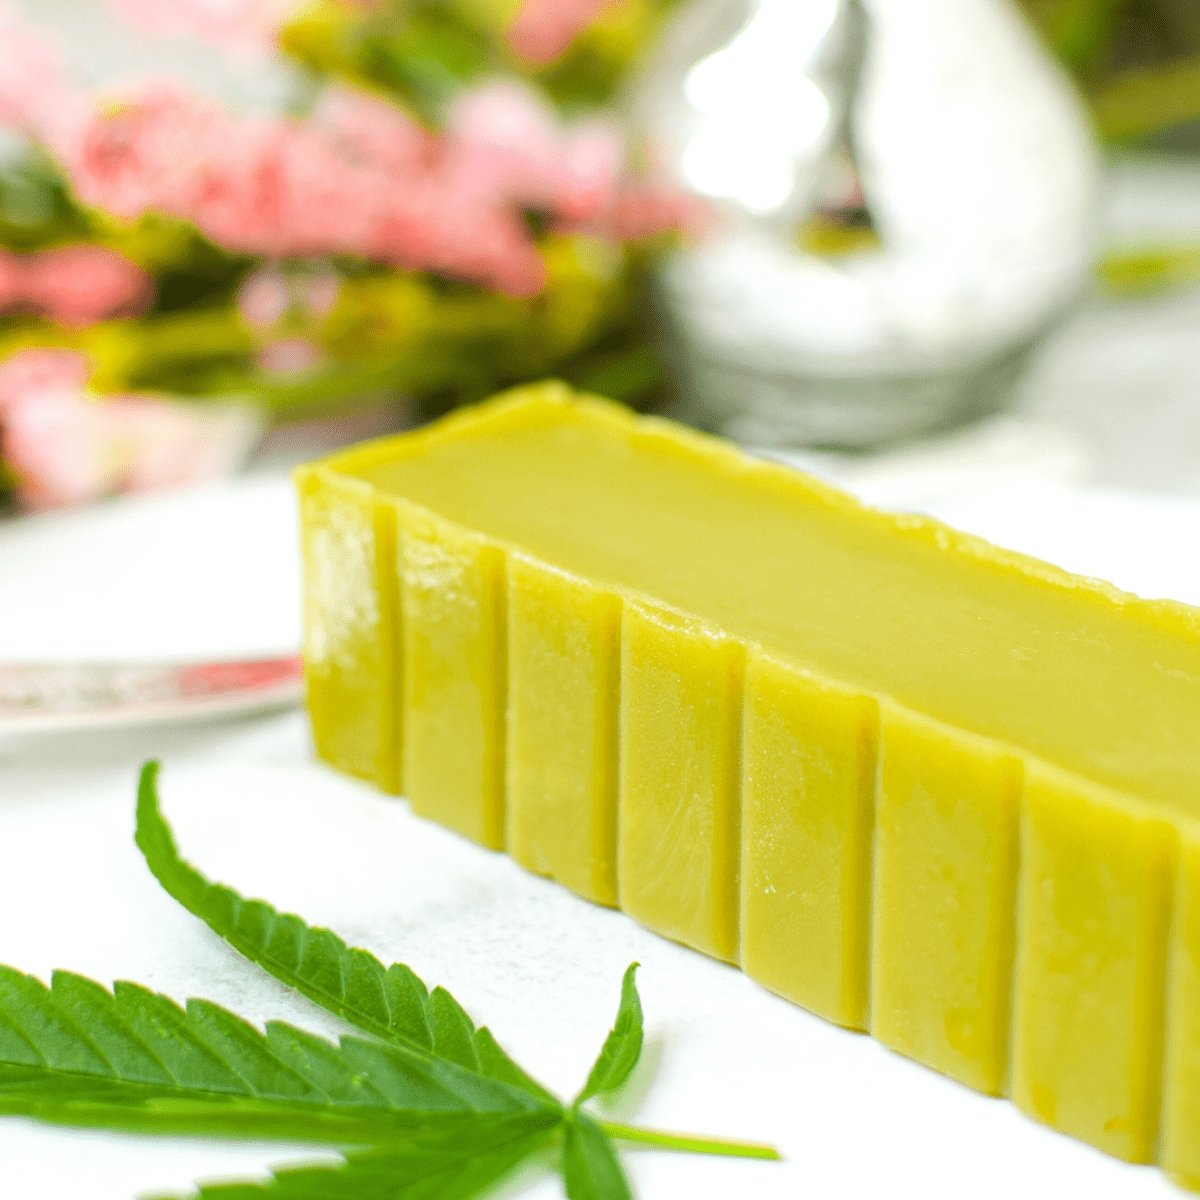 How to Make Cannabutter: A Simple Recipe for Infusing Cannabis into Your Cooking - Oil Slick